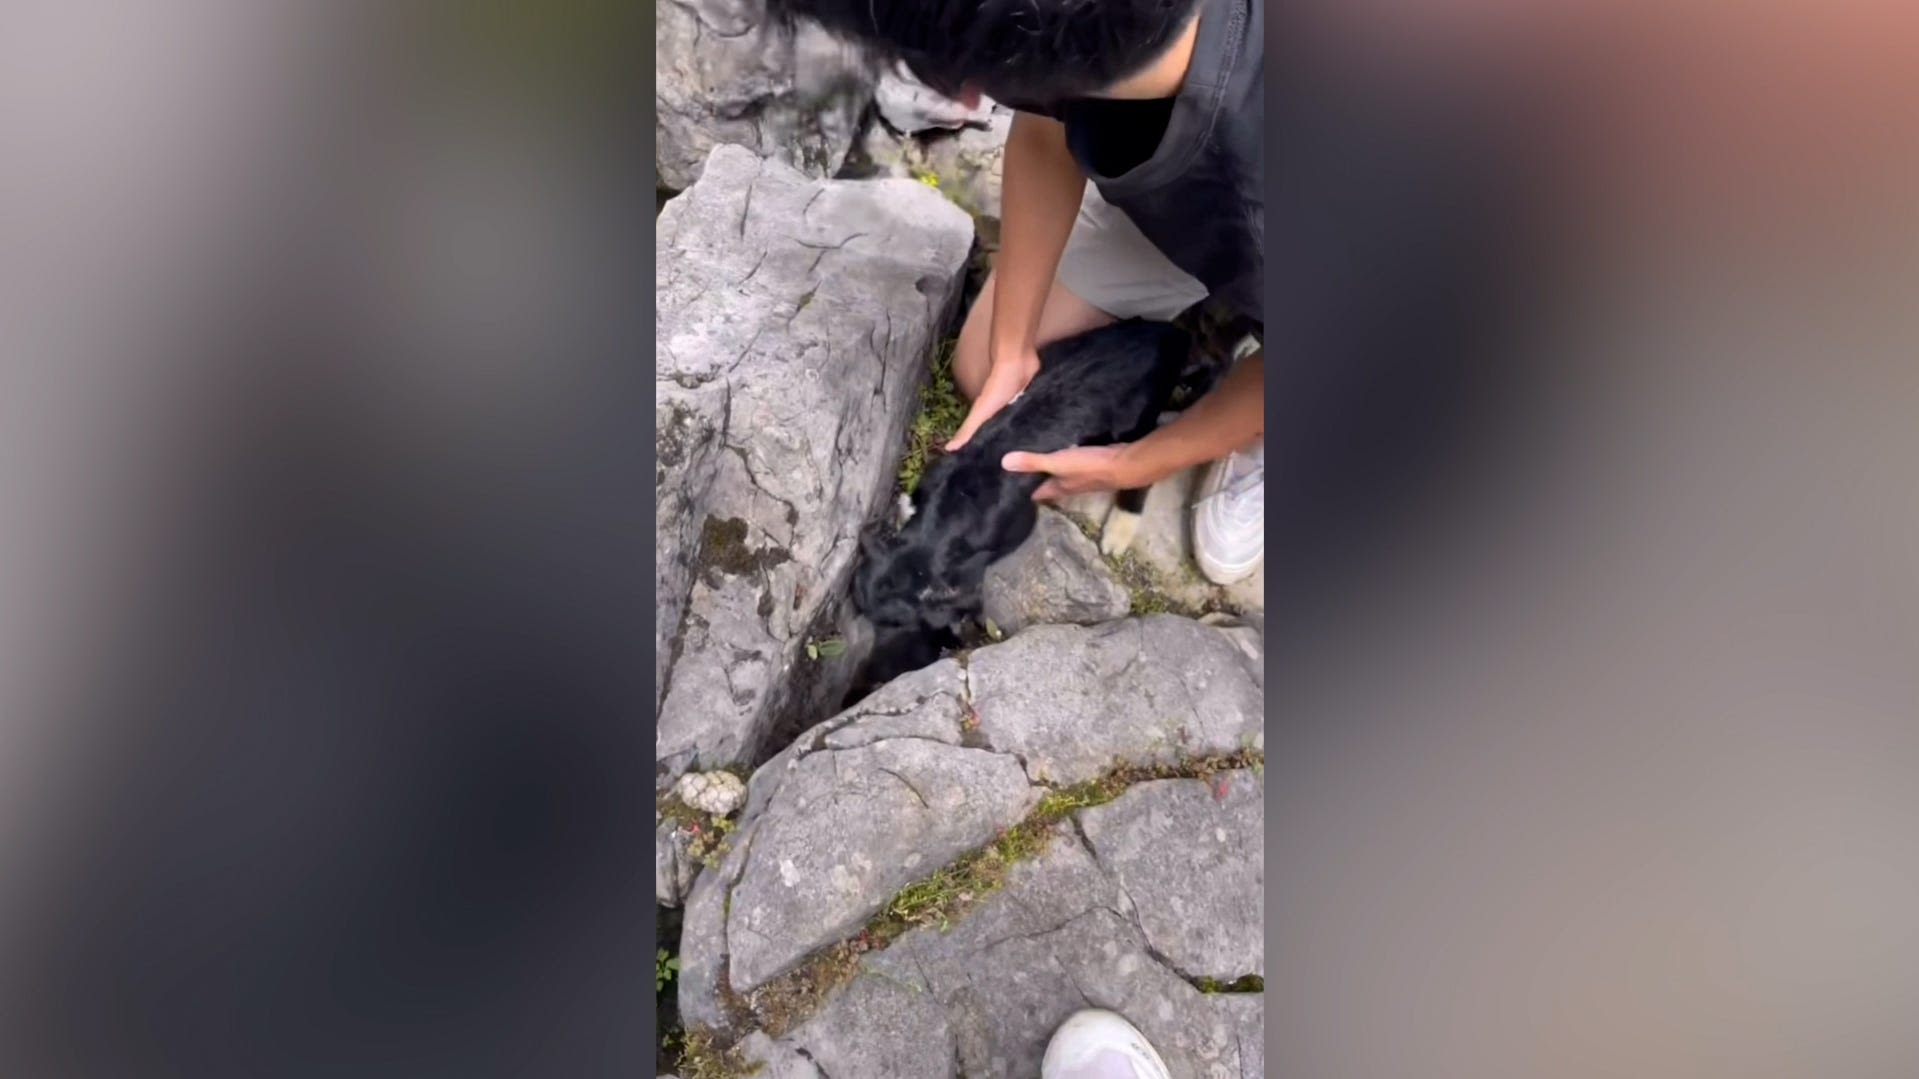 Watch this trapped lamb reunited with its distressed mom by two Good Samaritan hikers